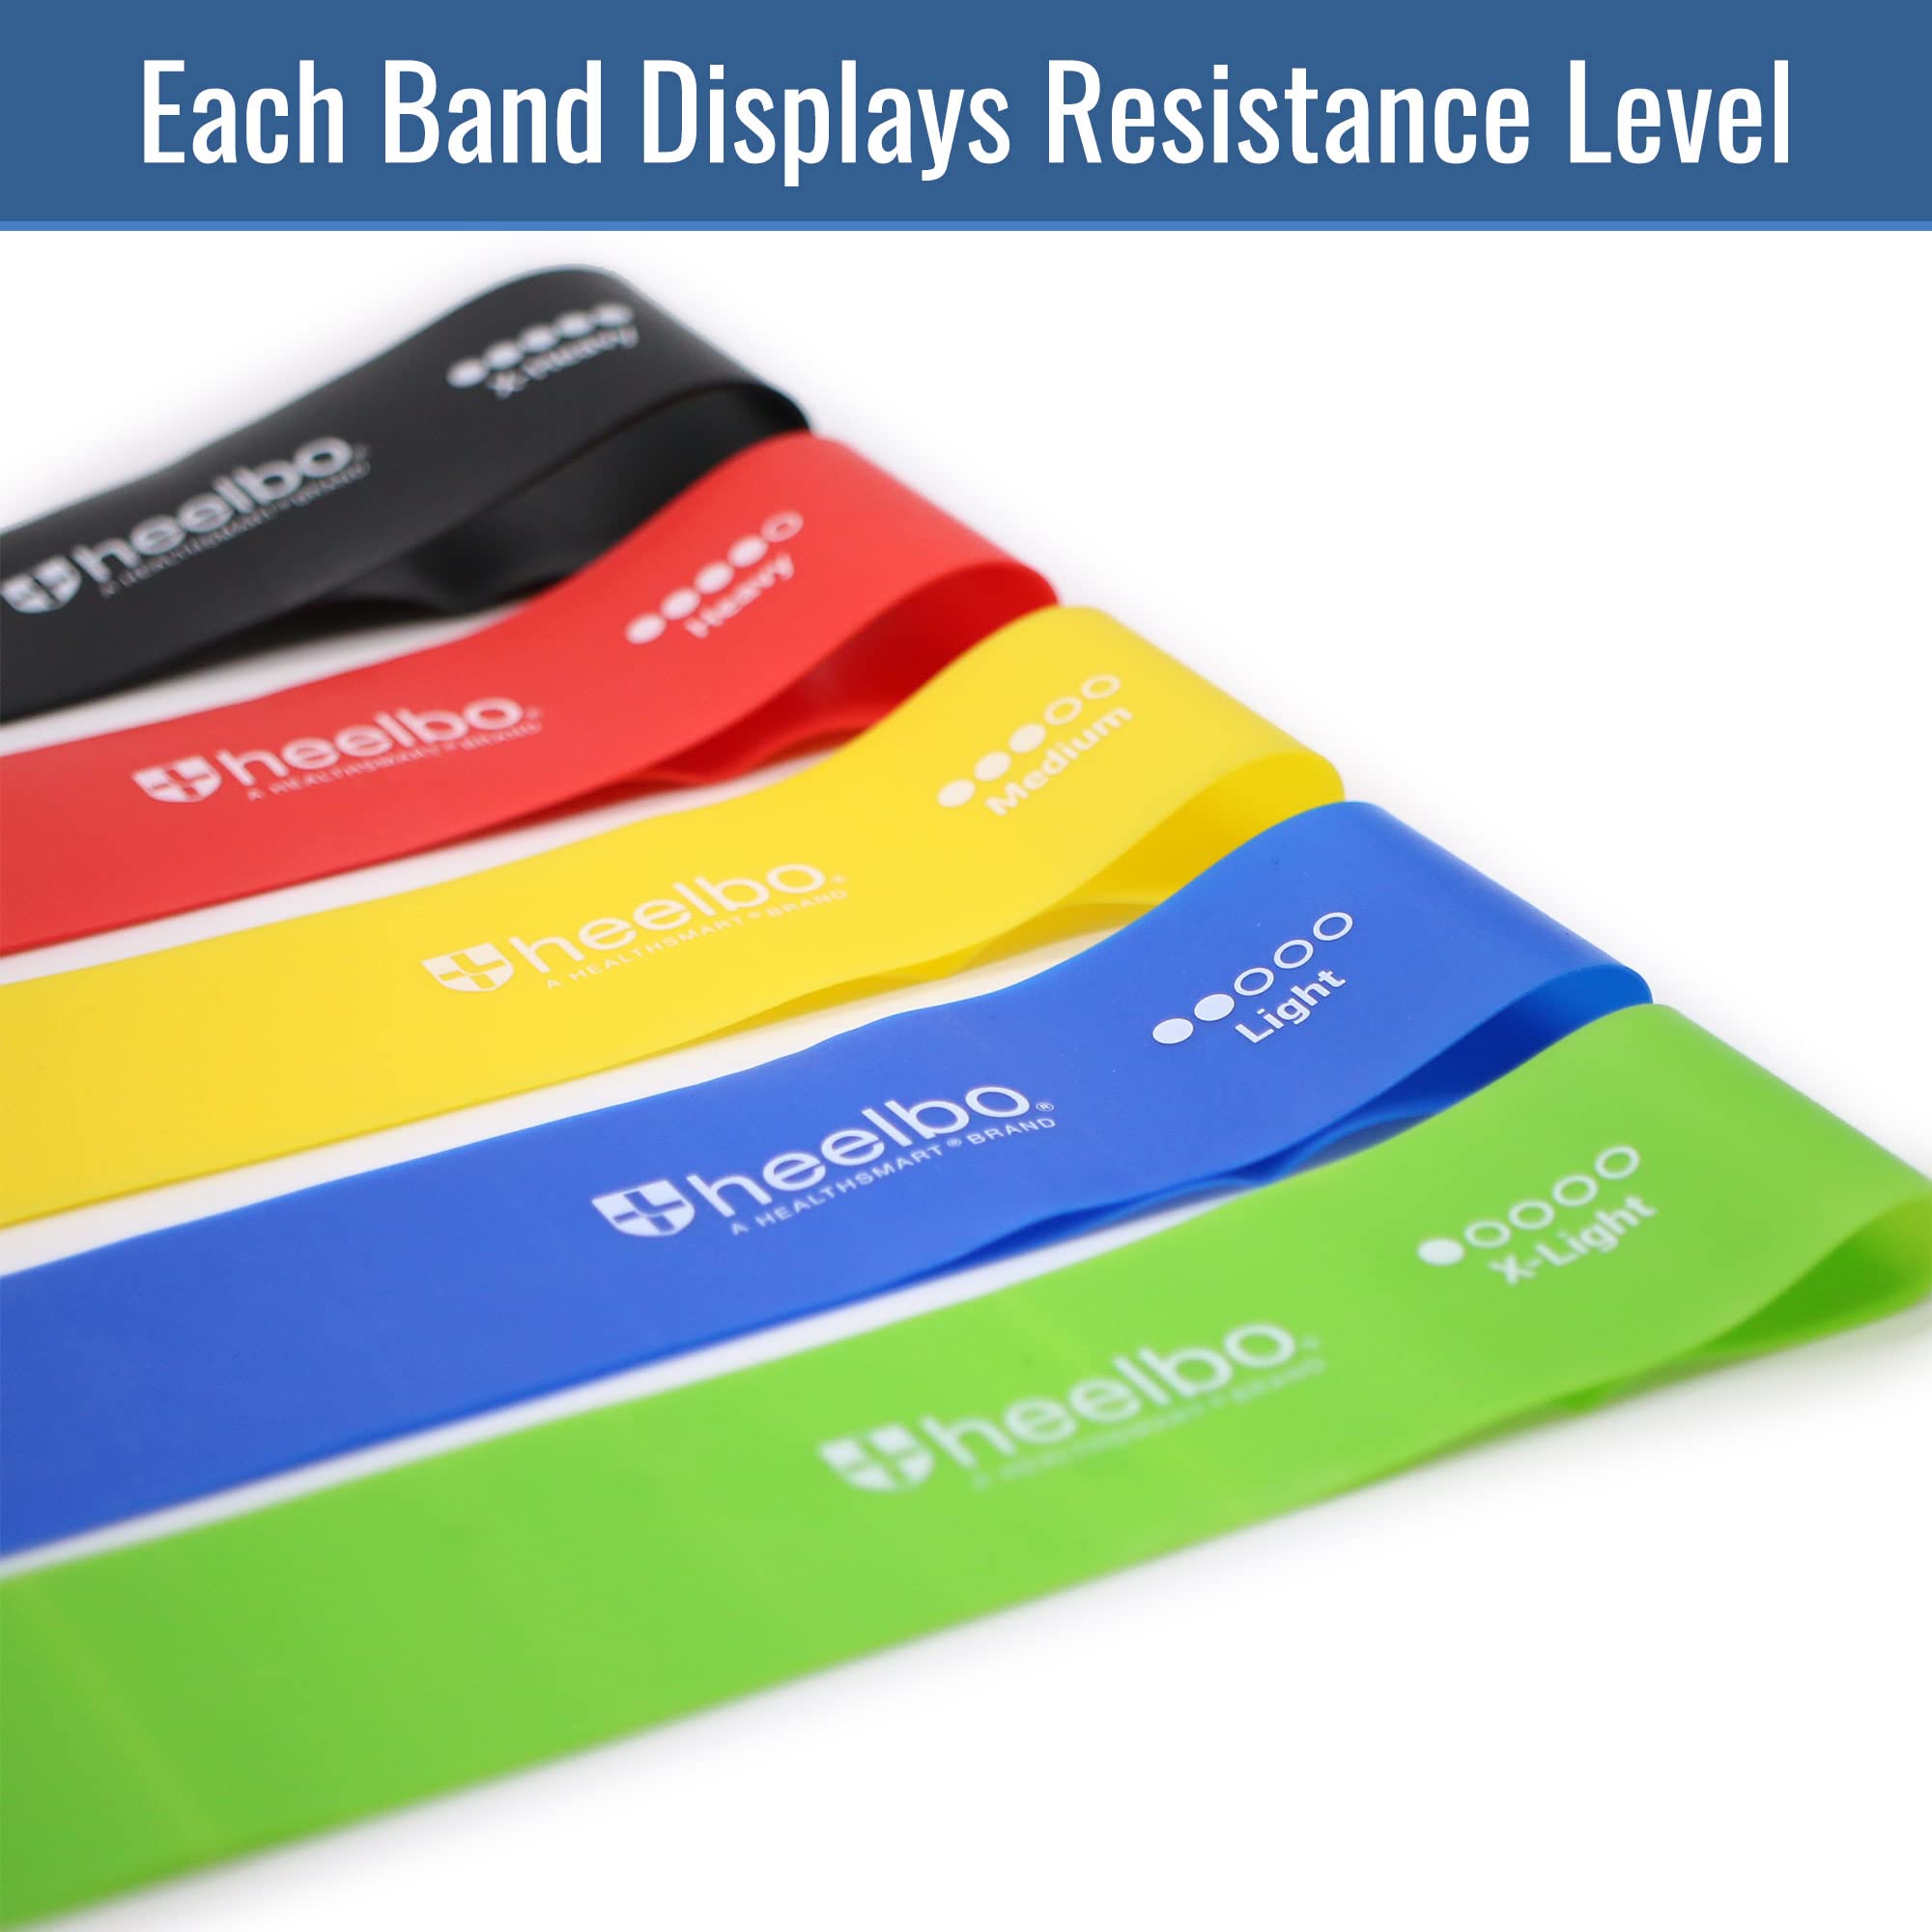 Heelbo Physical Therapy Rubber Resistance Bands with 5 Levels of Resistance, Durable and Long-Lasting, FSA & HSA Eligible, Includes 5 Bands, Travel Bag & Instruction Manual